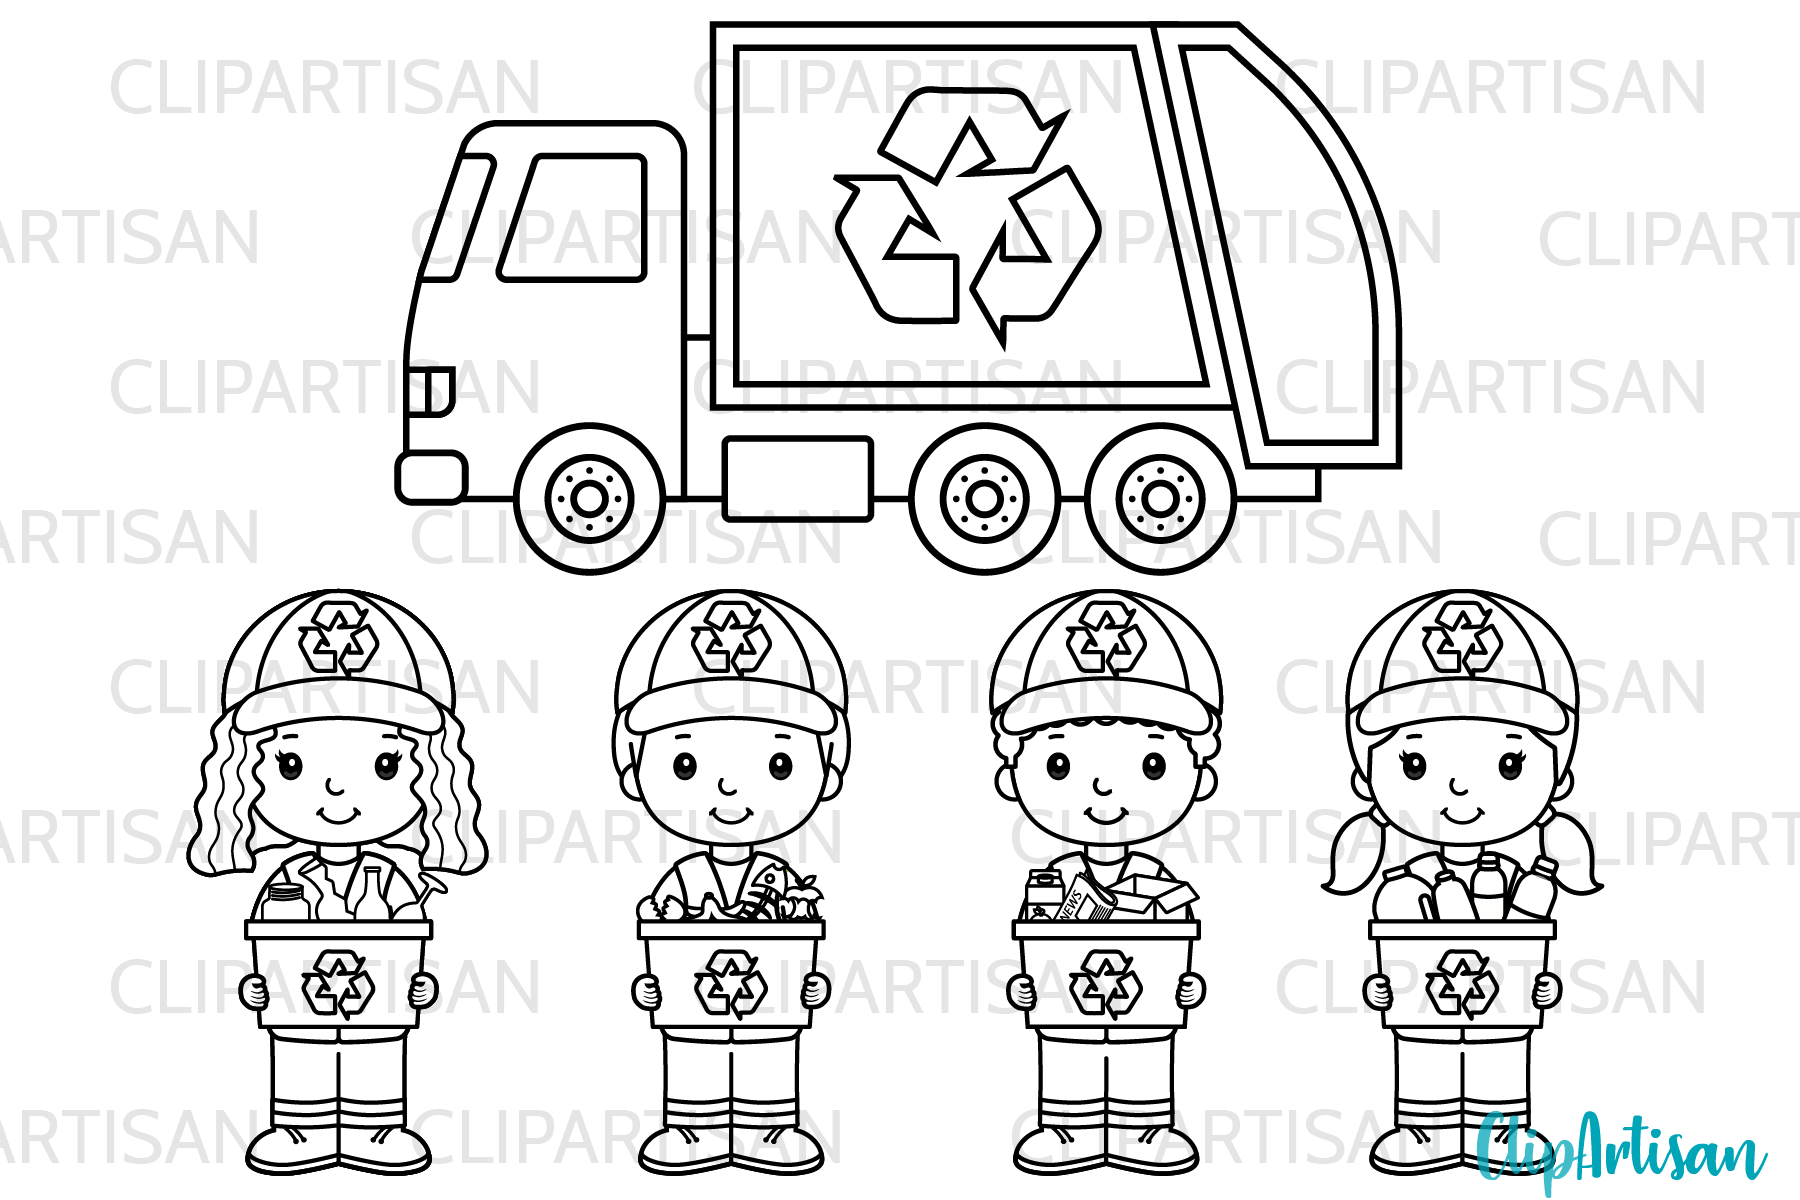 earth day clipart black and white